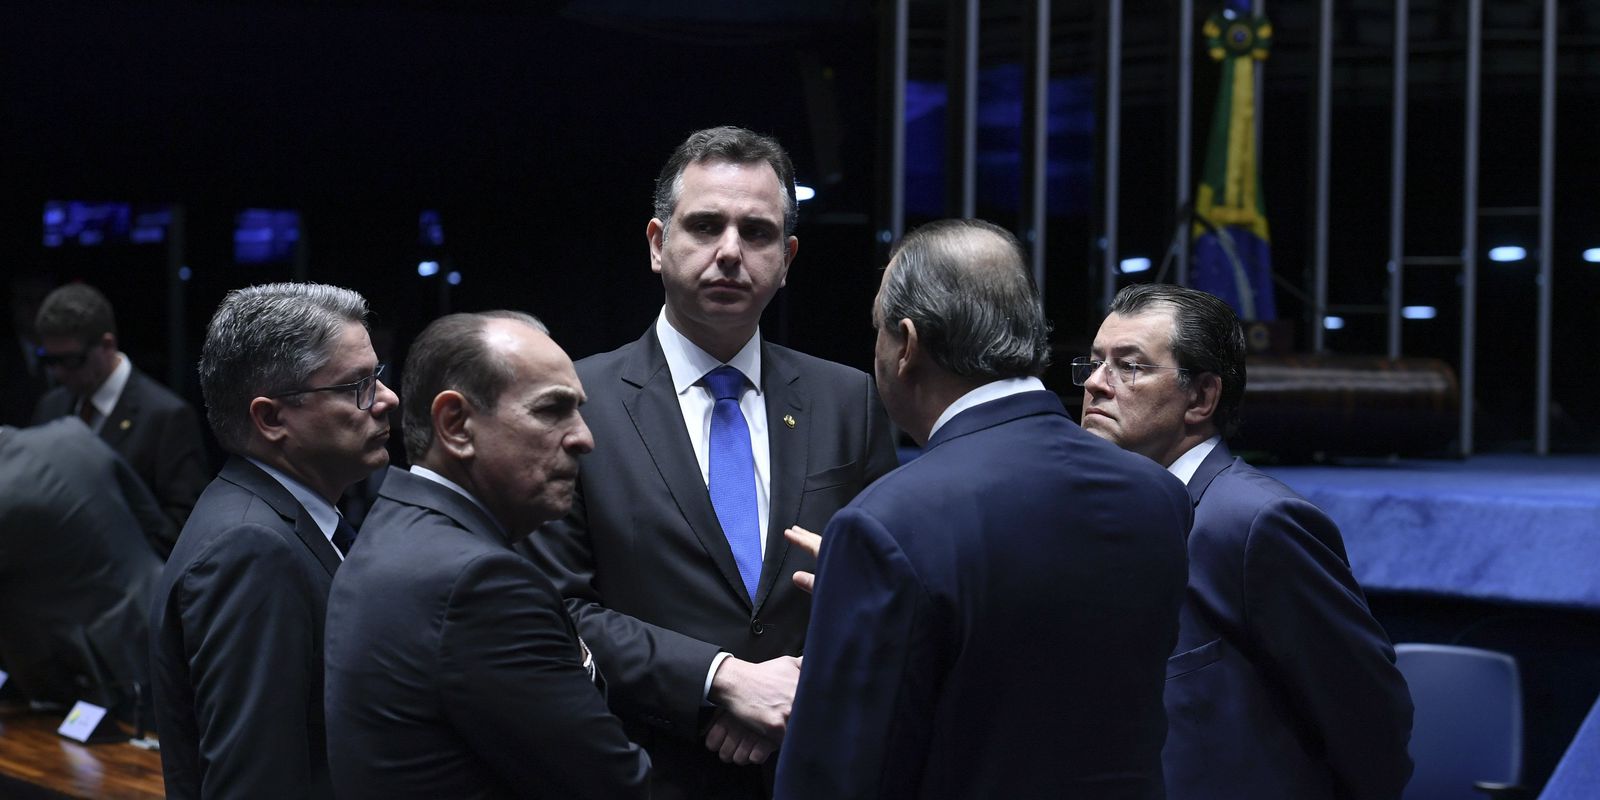 “Brazil will not give in to coups”, says Senate president